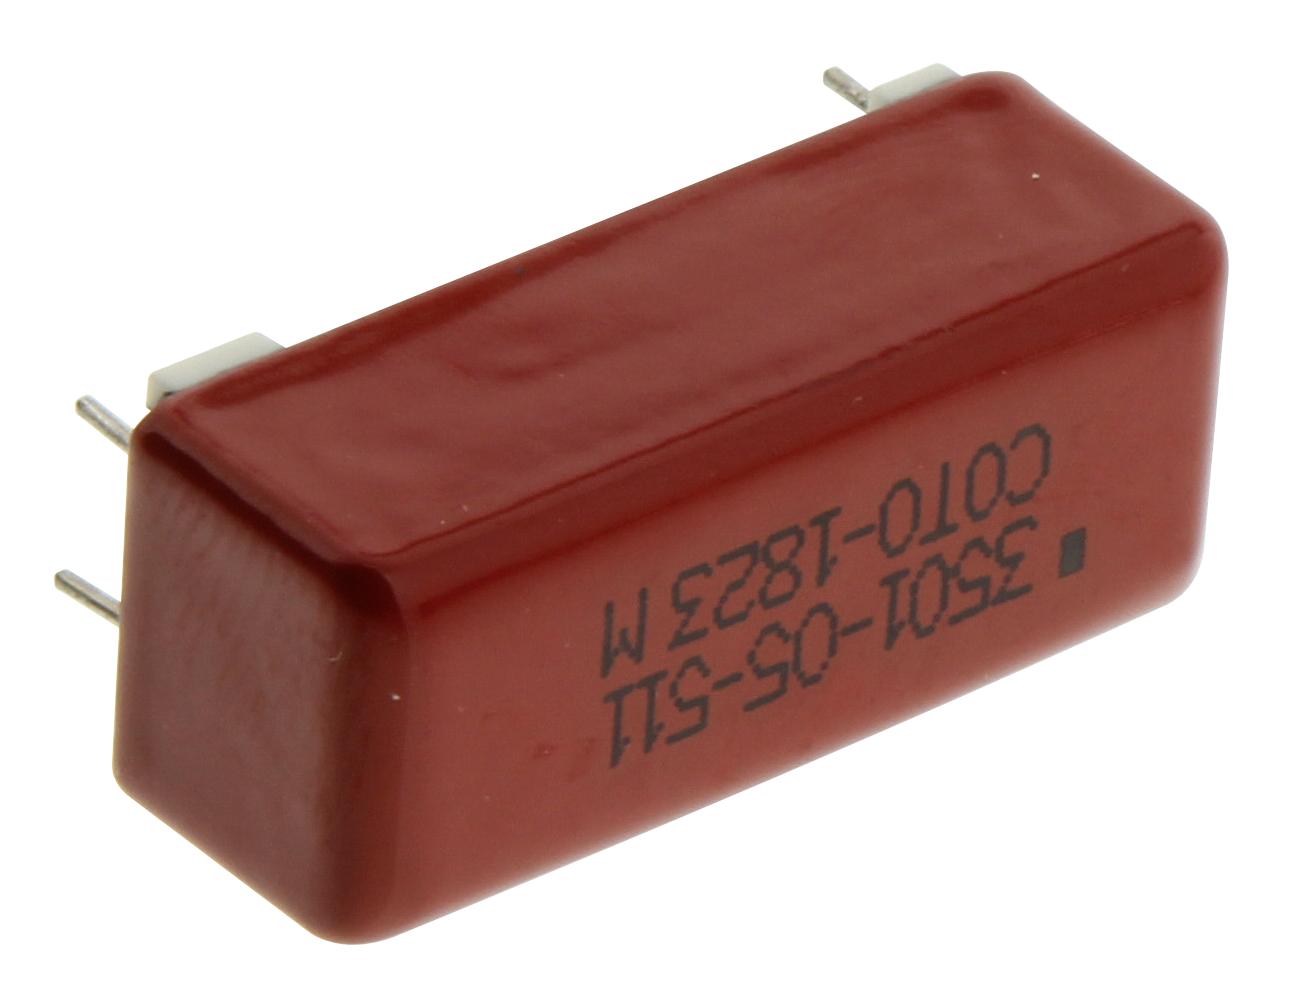 Coto Technology 3501-05-511 Reed Relay, Spst-No, 5Vdc, 0.5A, Tht